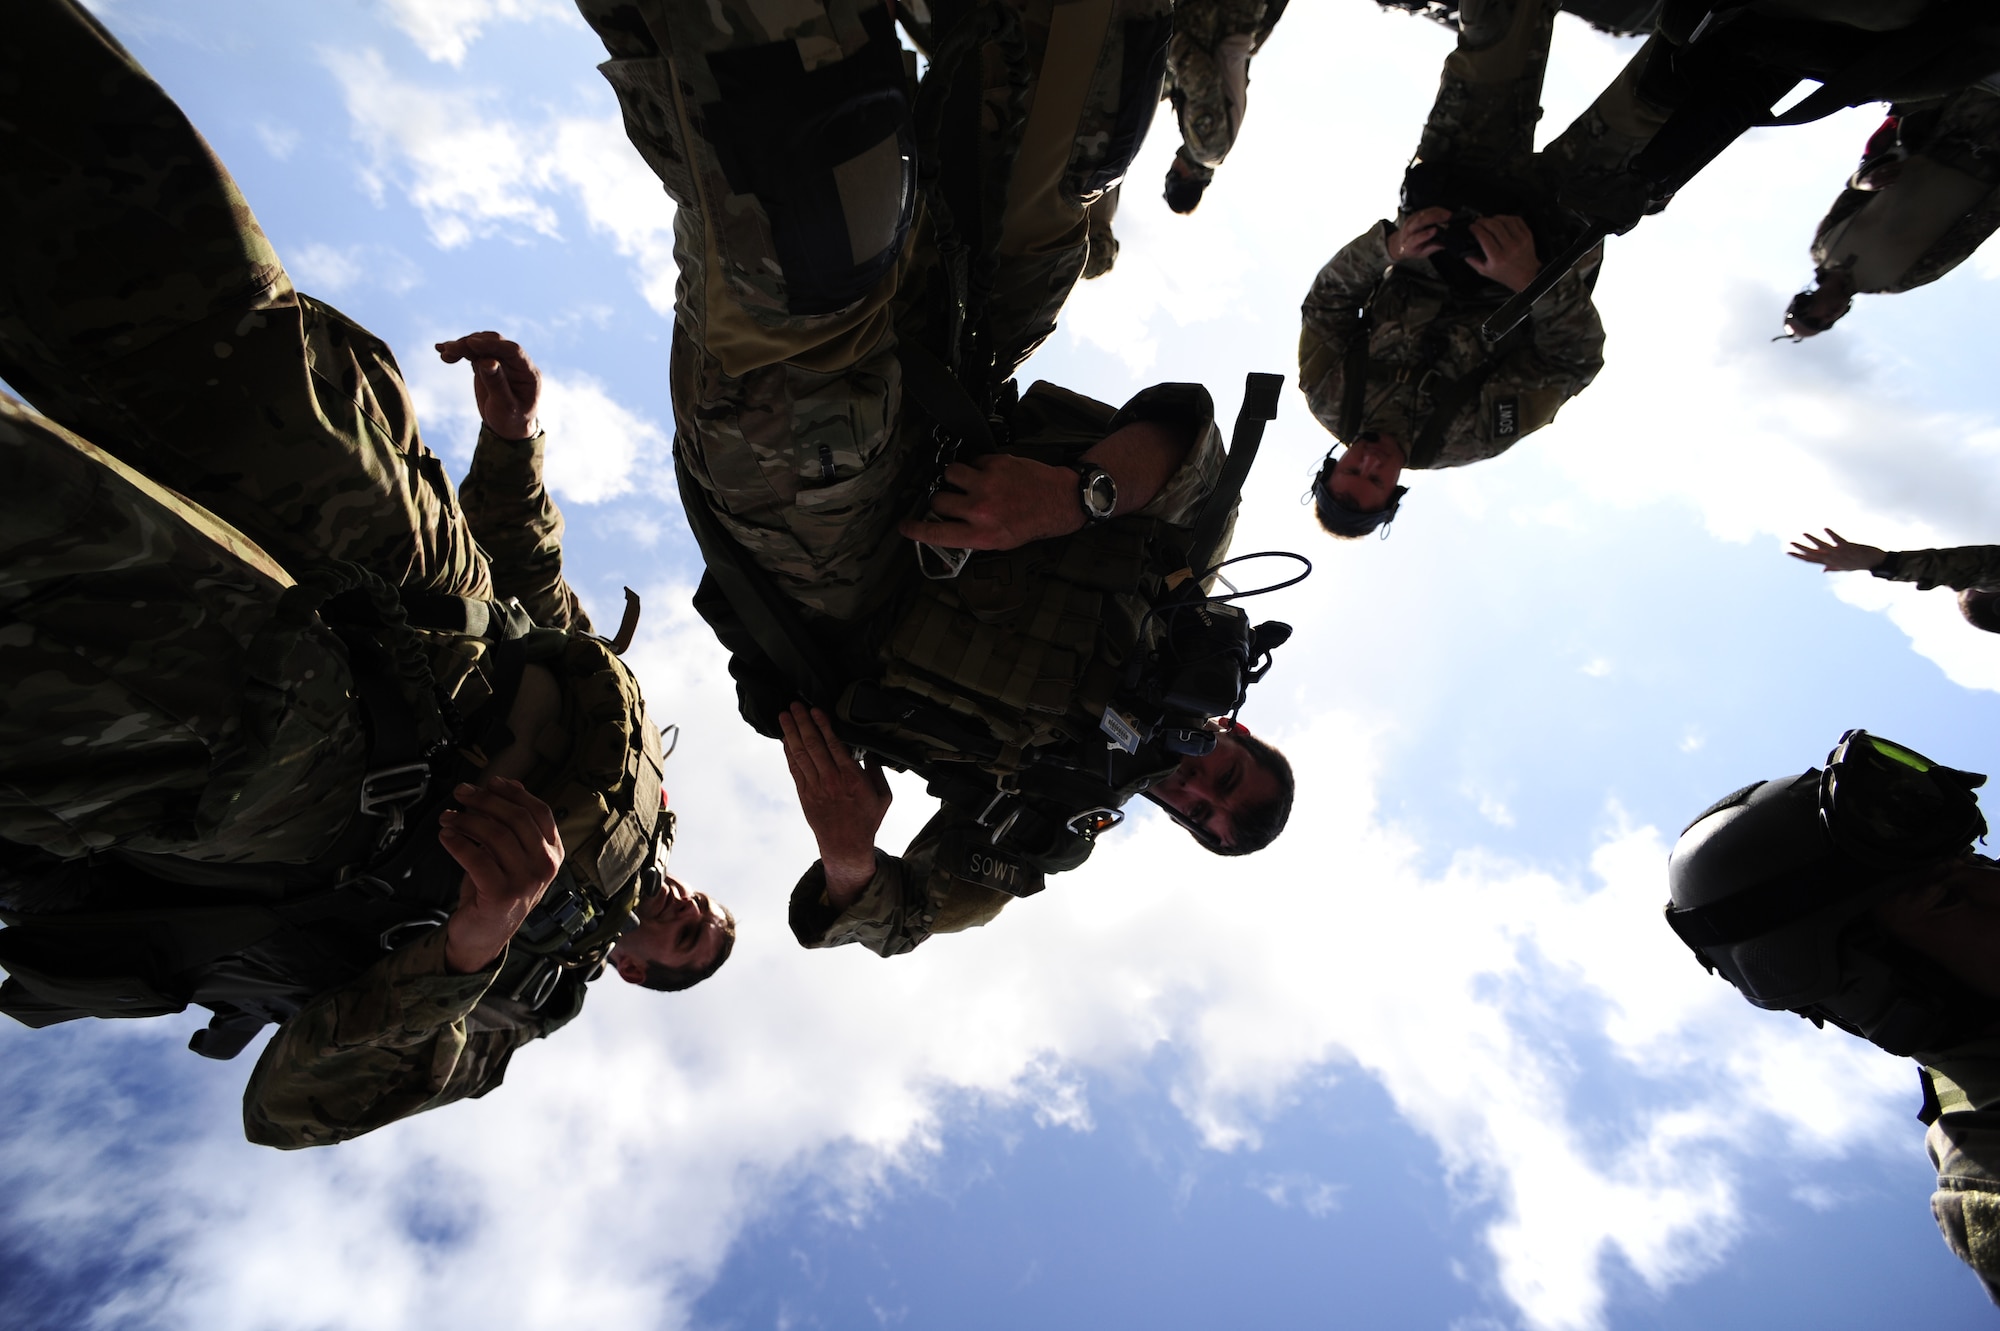 A Special Operations Weather Team from the 10th Combat Weather Squadron, dons parachutes before boarding a 9th Special Operations Squadron MC-130P for Operation Nimble Response, Hurlburt Field, Fla., May 11, 2011. Operation Nimble Response is an exercise to hone humanitarian and disaster relief efforts. Close to 50 personnel from Head Quarters Air Force Special Operations Command, 1st Special Operations Wing, and 280th Combat Communications Squadron, in coordination with USAID, worked together to improve disaster response. (U.S. Air Force photo by Staff Sgt. Julianne M. Showalter/Released)